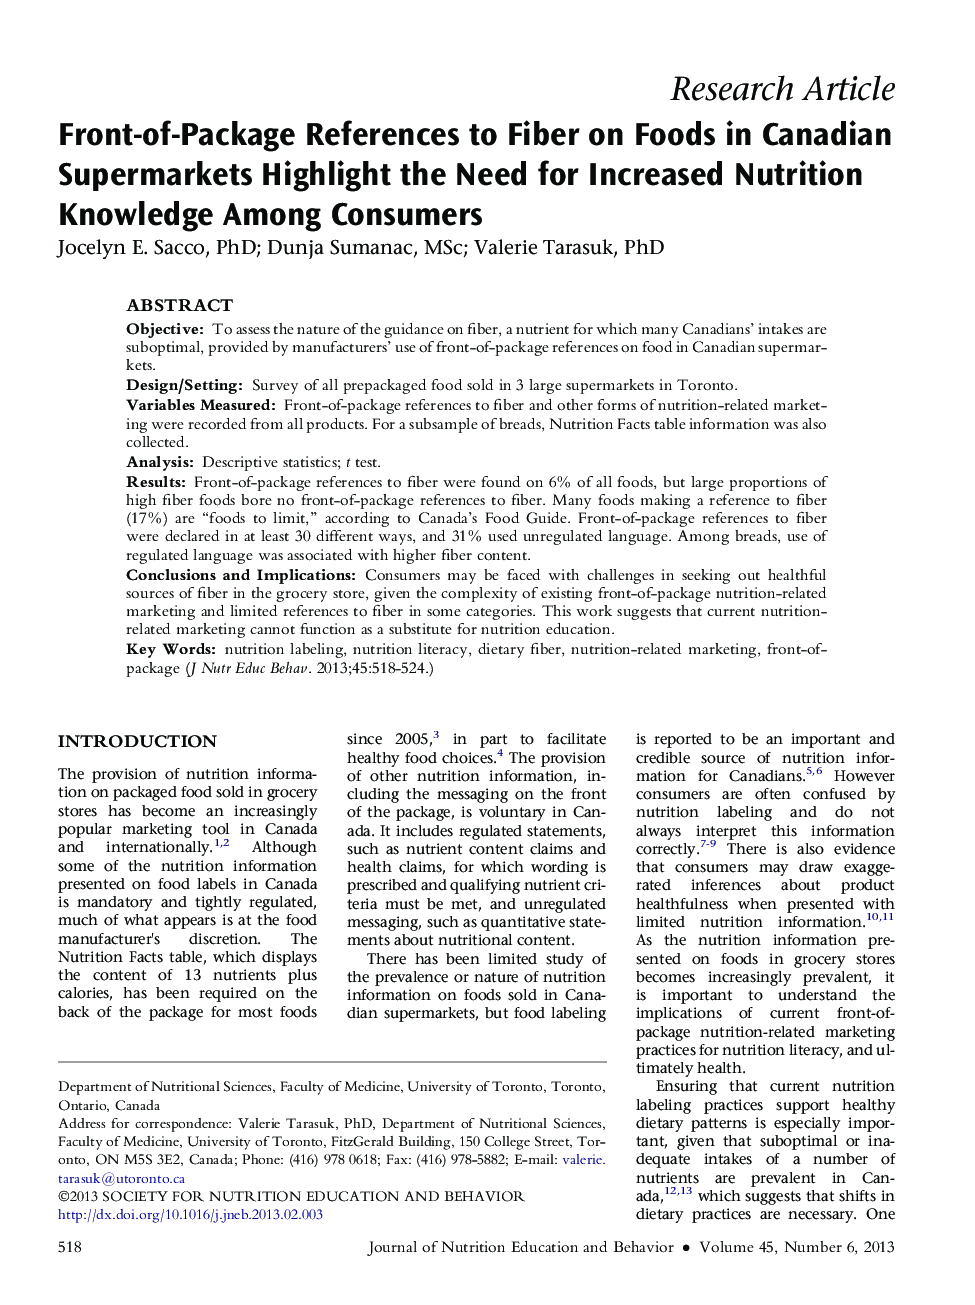 Front-of-Package References to Fiber on Foods in Canadian Supermarkets Highlight the Need for Increased Nutrition Knowledge Among Consumers